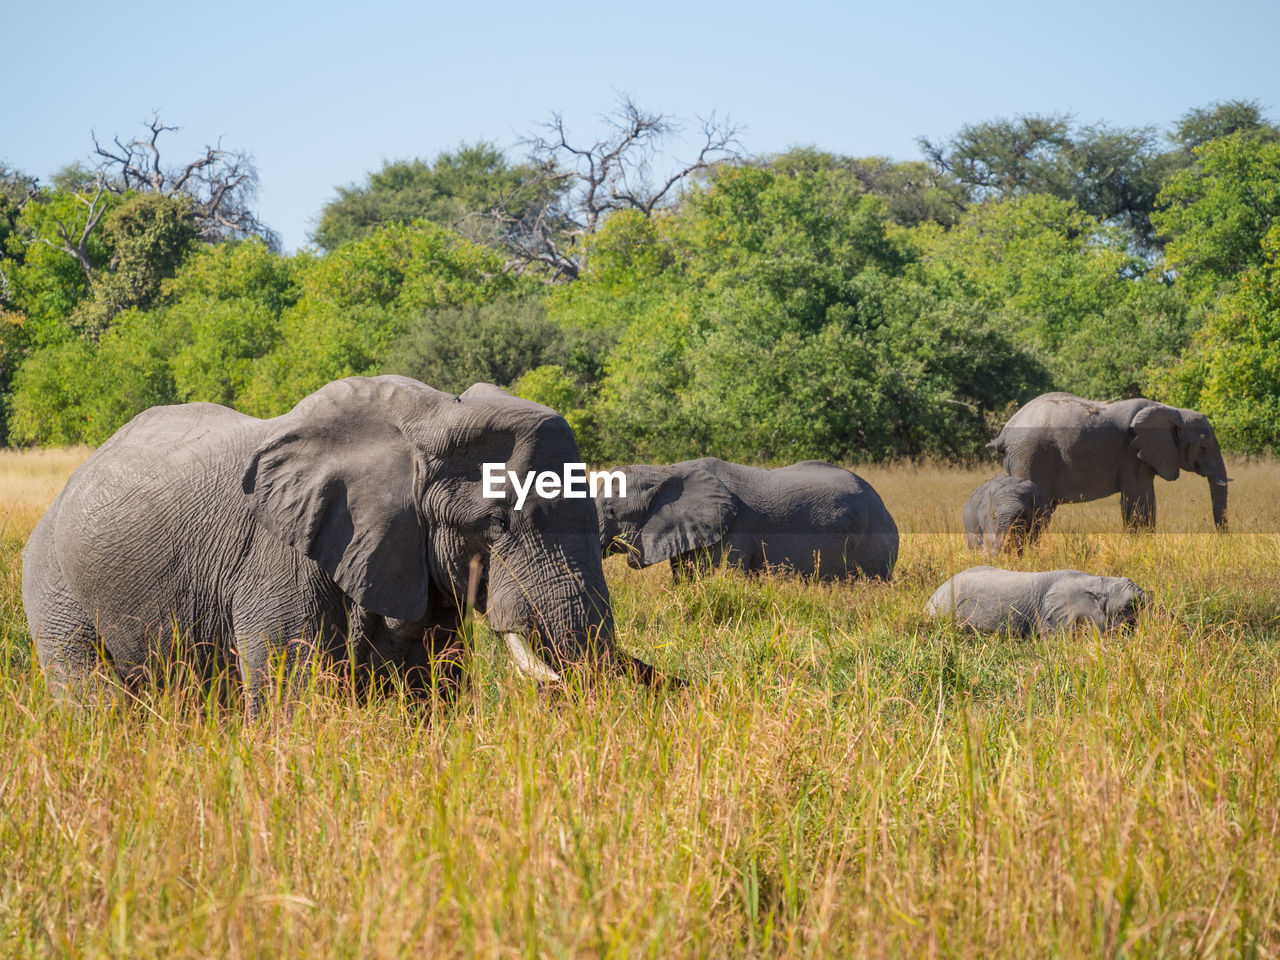 African elephant family grazing in high grass, moremi game reserver, botswana